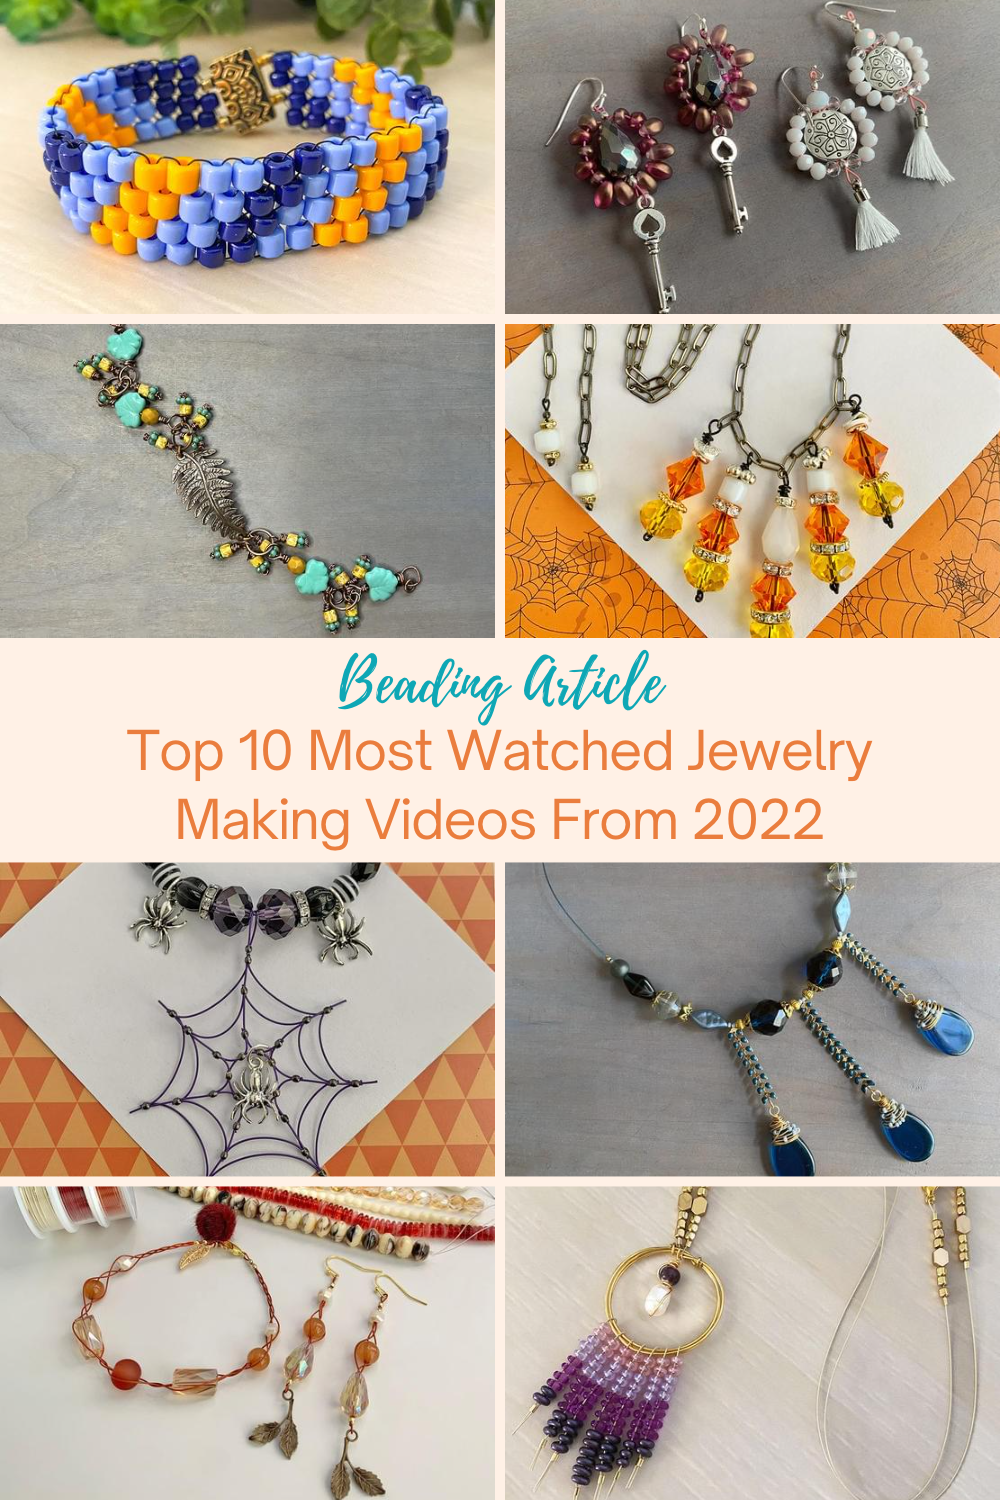 Top 10 Most Watched Jewelry Making Videos From 2022 Collage